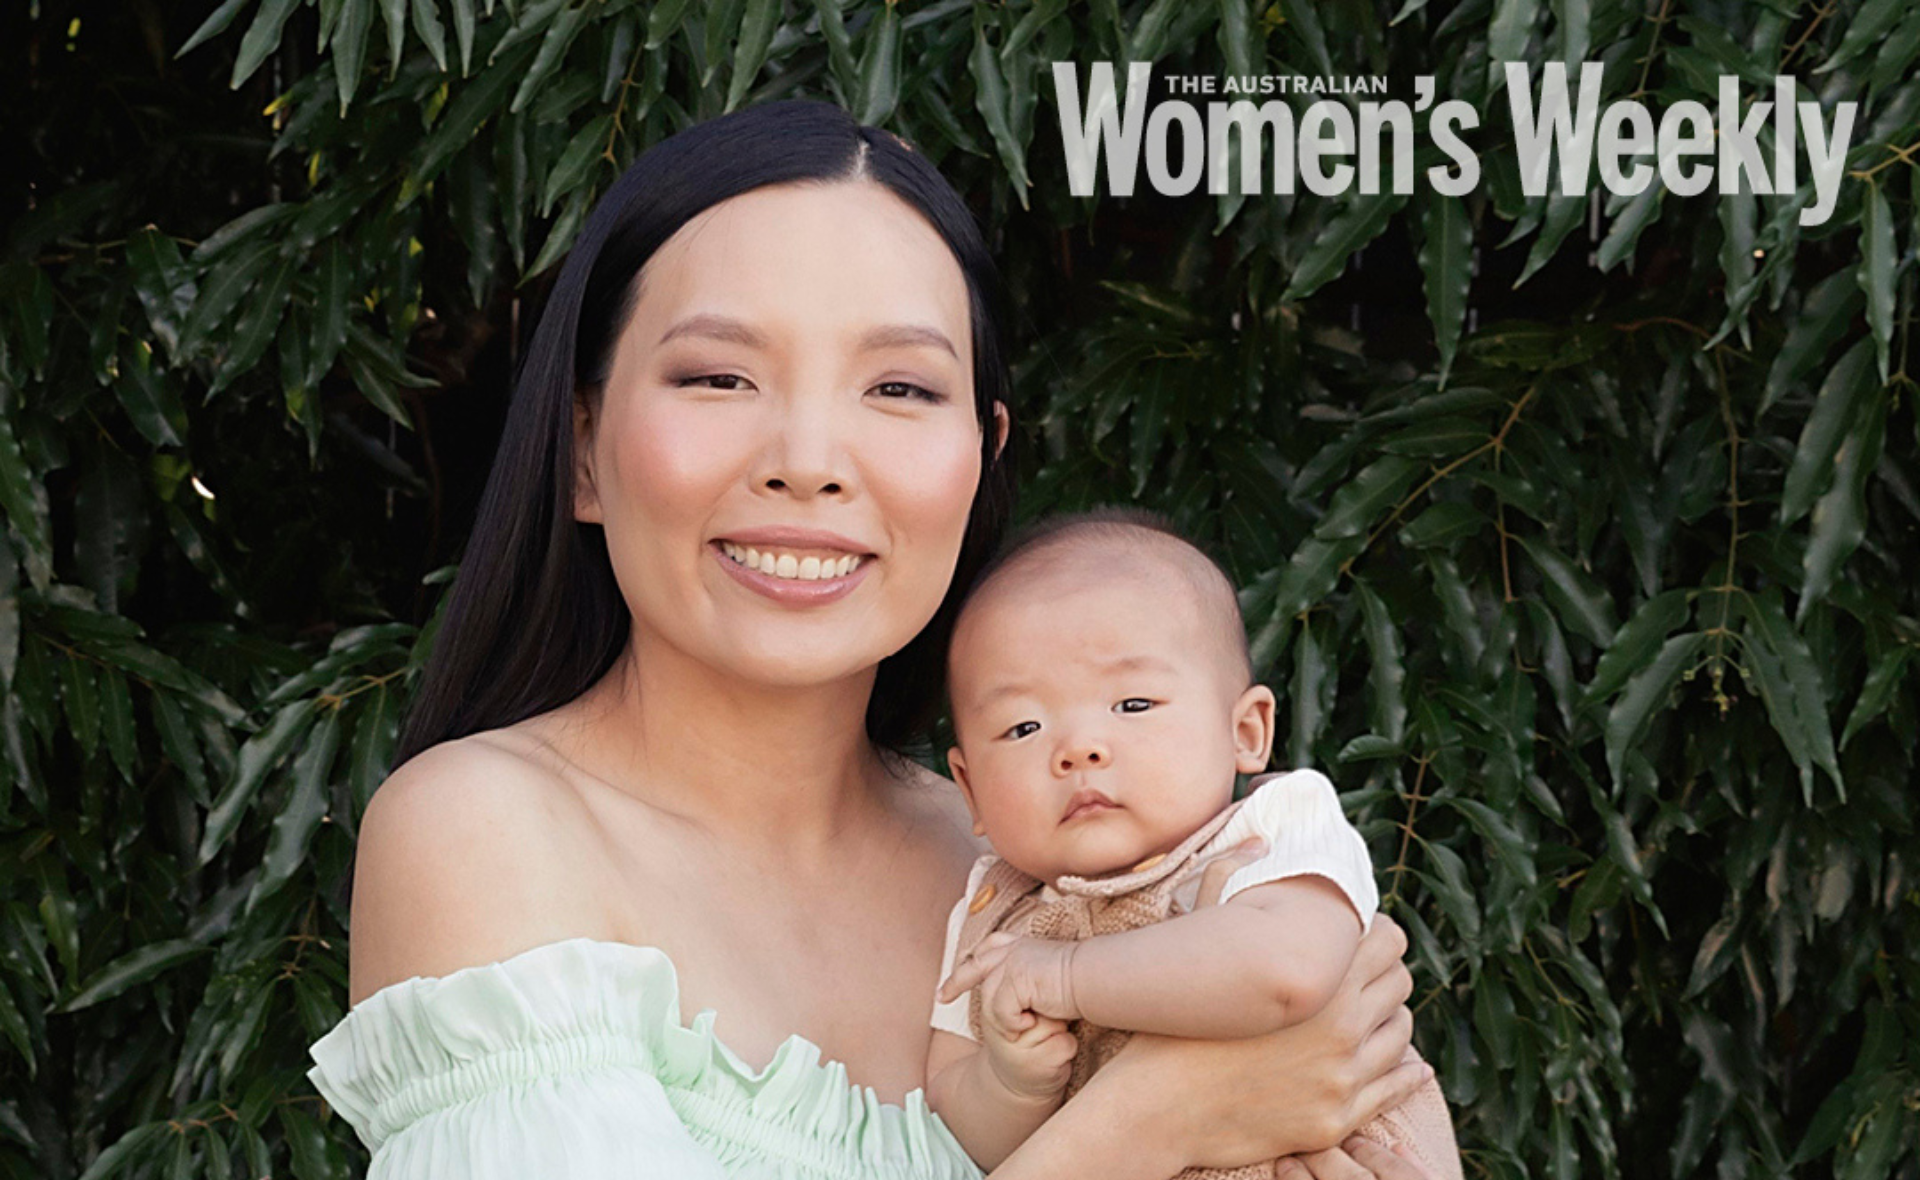 EXCLUSIVE: Why Dami Im’s baby son makes Australia’s favourite songstress “explode with joy” in her first year of motherhood